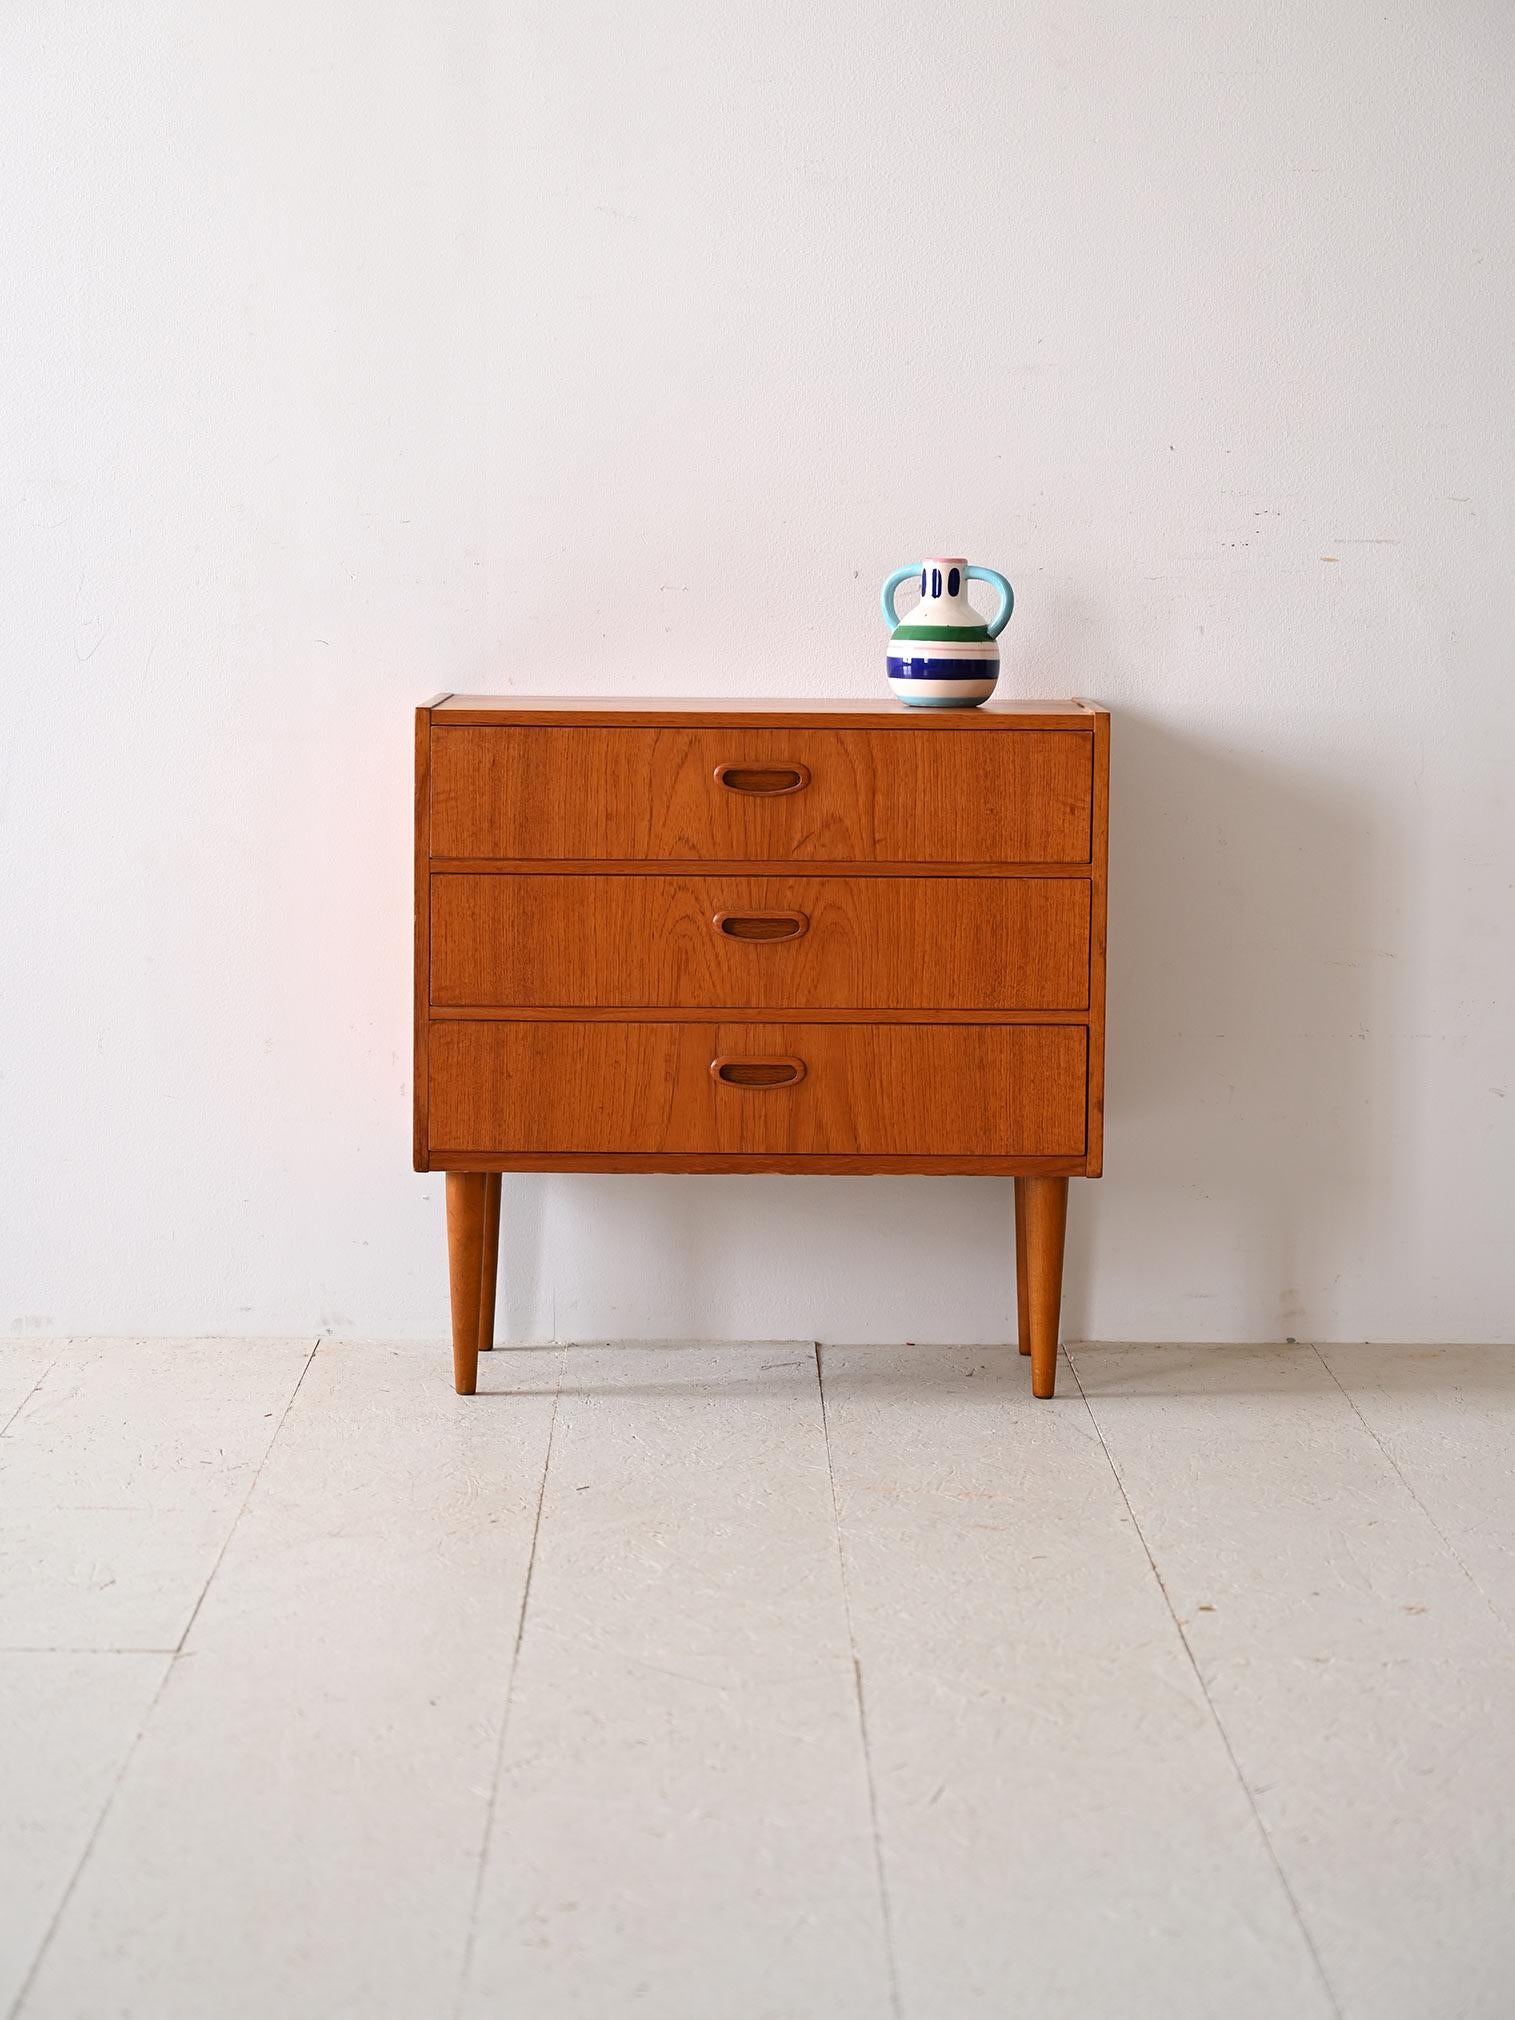 Small original 1960s Danish style chest of drawers.

The linear frame features three drawers with wood-carved handles and is supported by tapered legs that emphasize its lightness.
Despite its small size, it is designed to maximize storage space